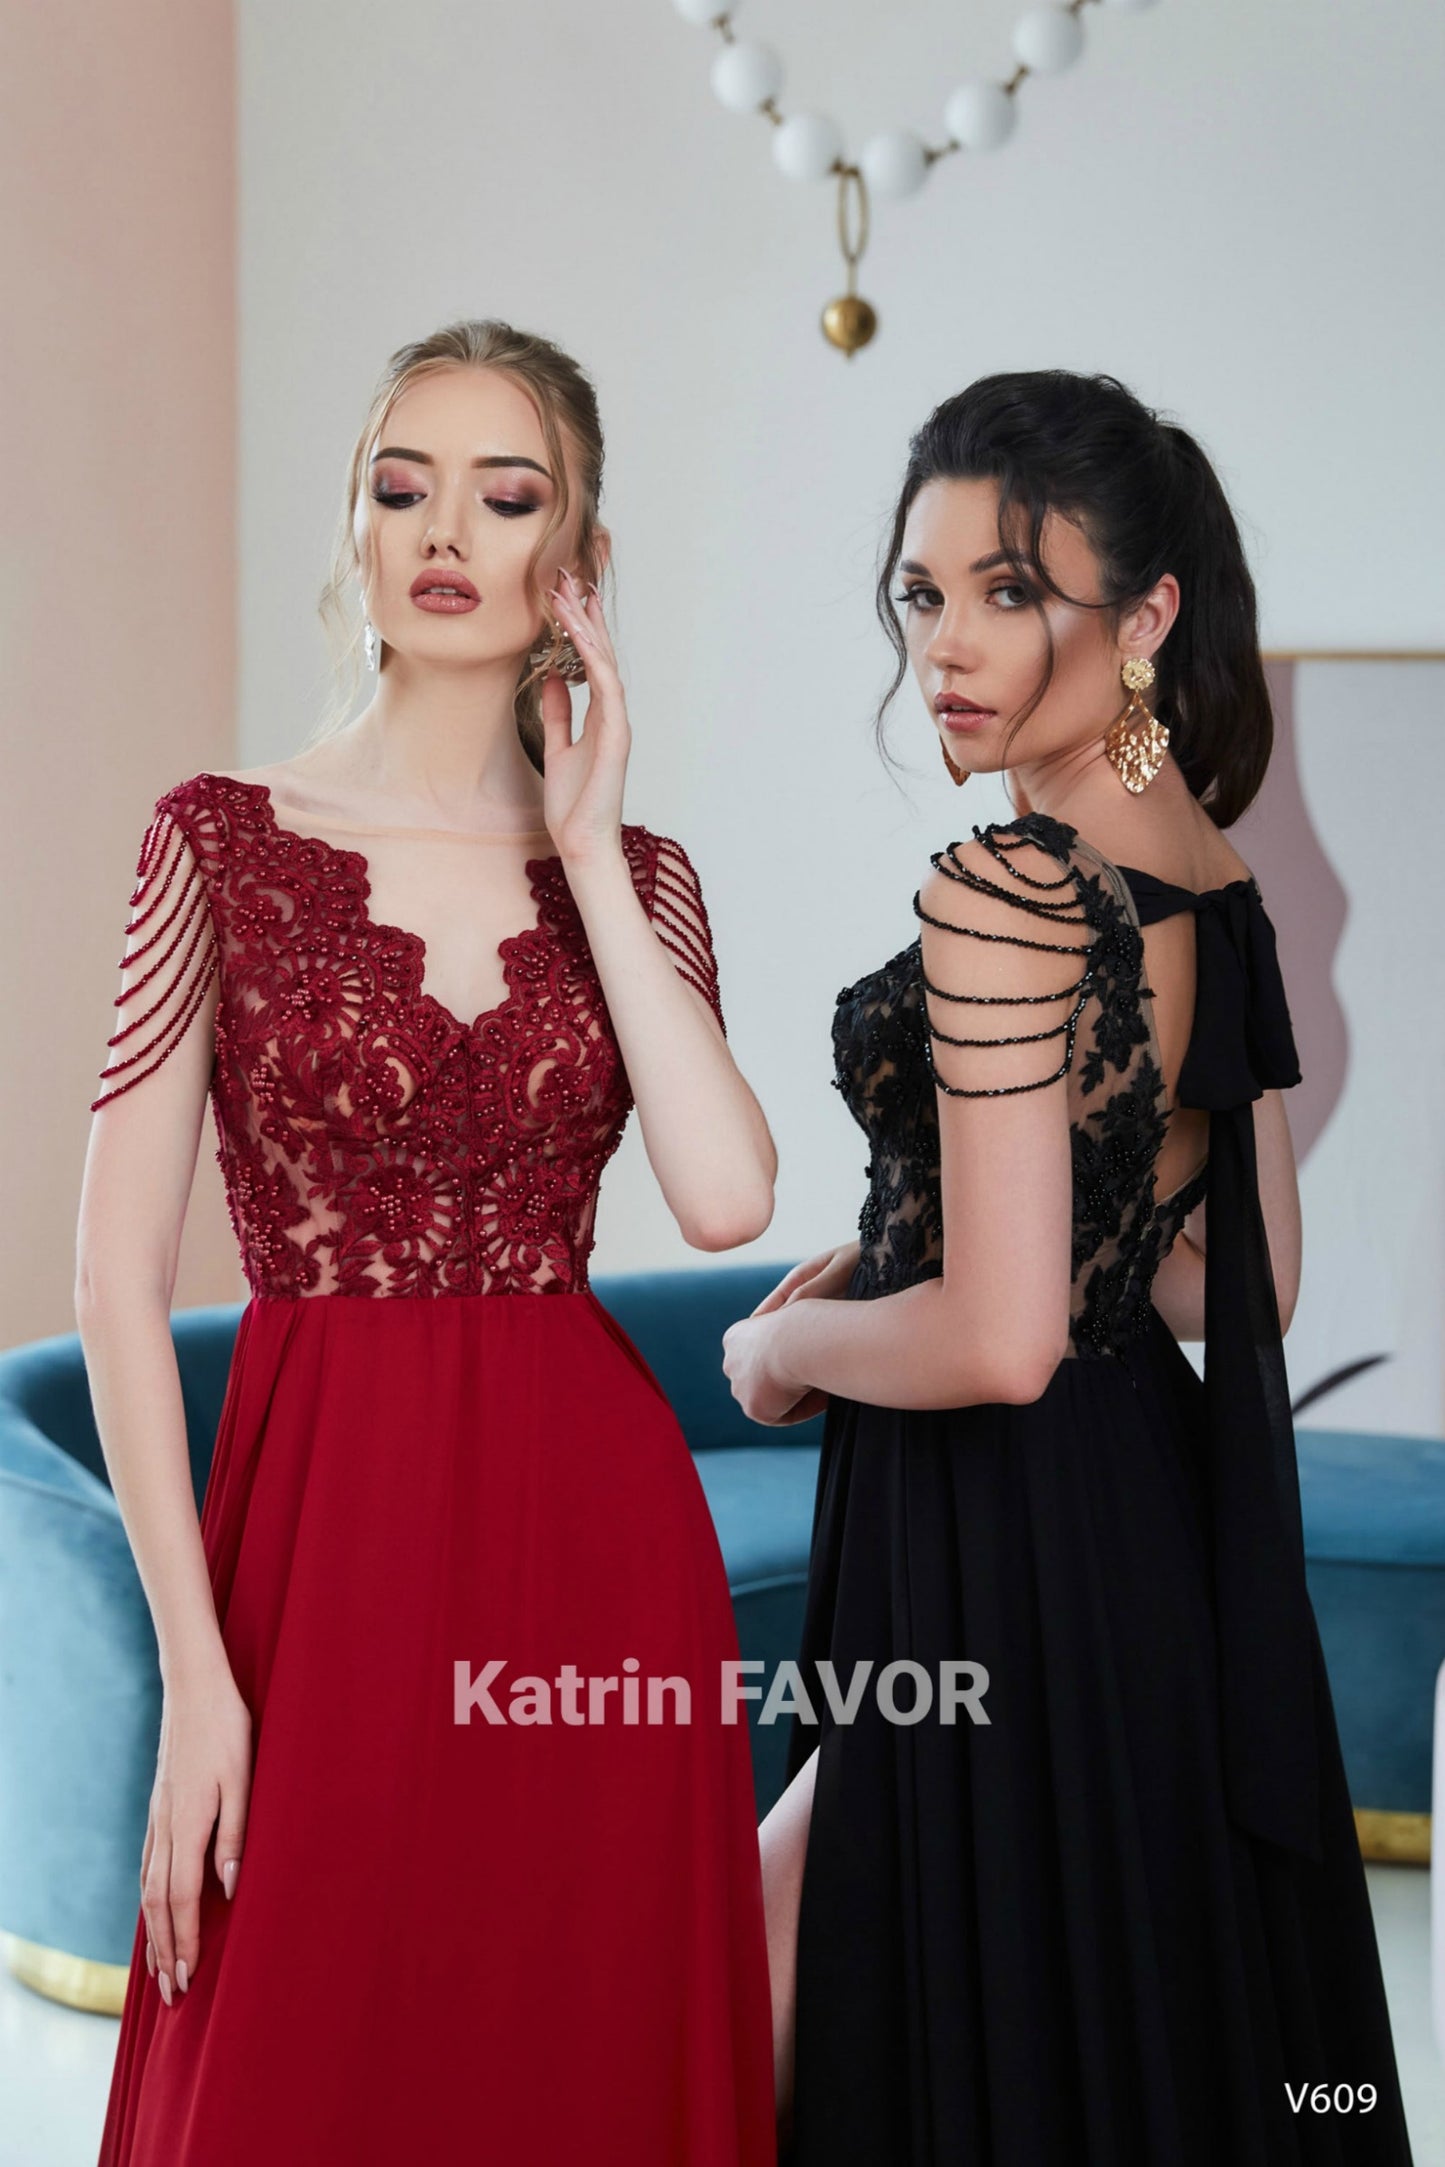 KatrinFAVORboutique-Sexy high slits goddess evening gown